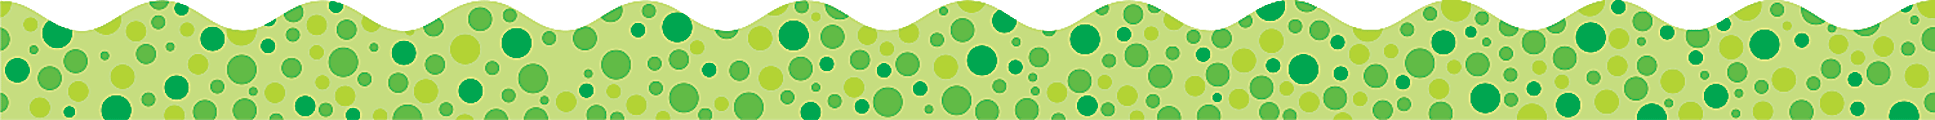 Scholastic Teacher's Friend Polka-Dots Scalloped Trimmers, 2 1/4" x 36', Green, Pre-K To Grade 5, Pack Of 12